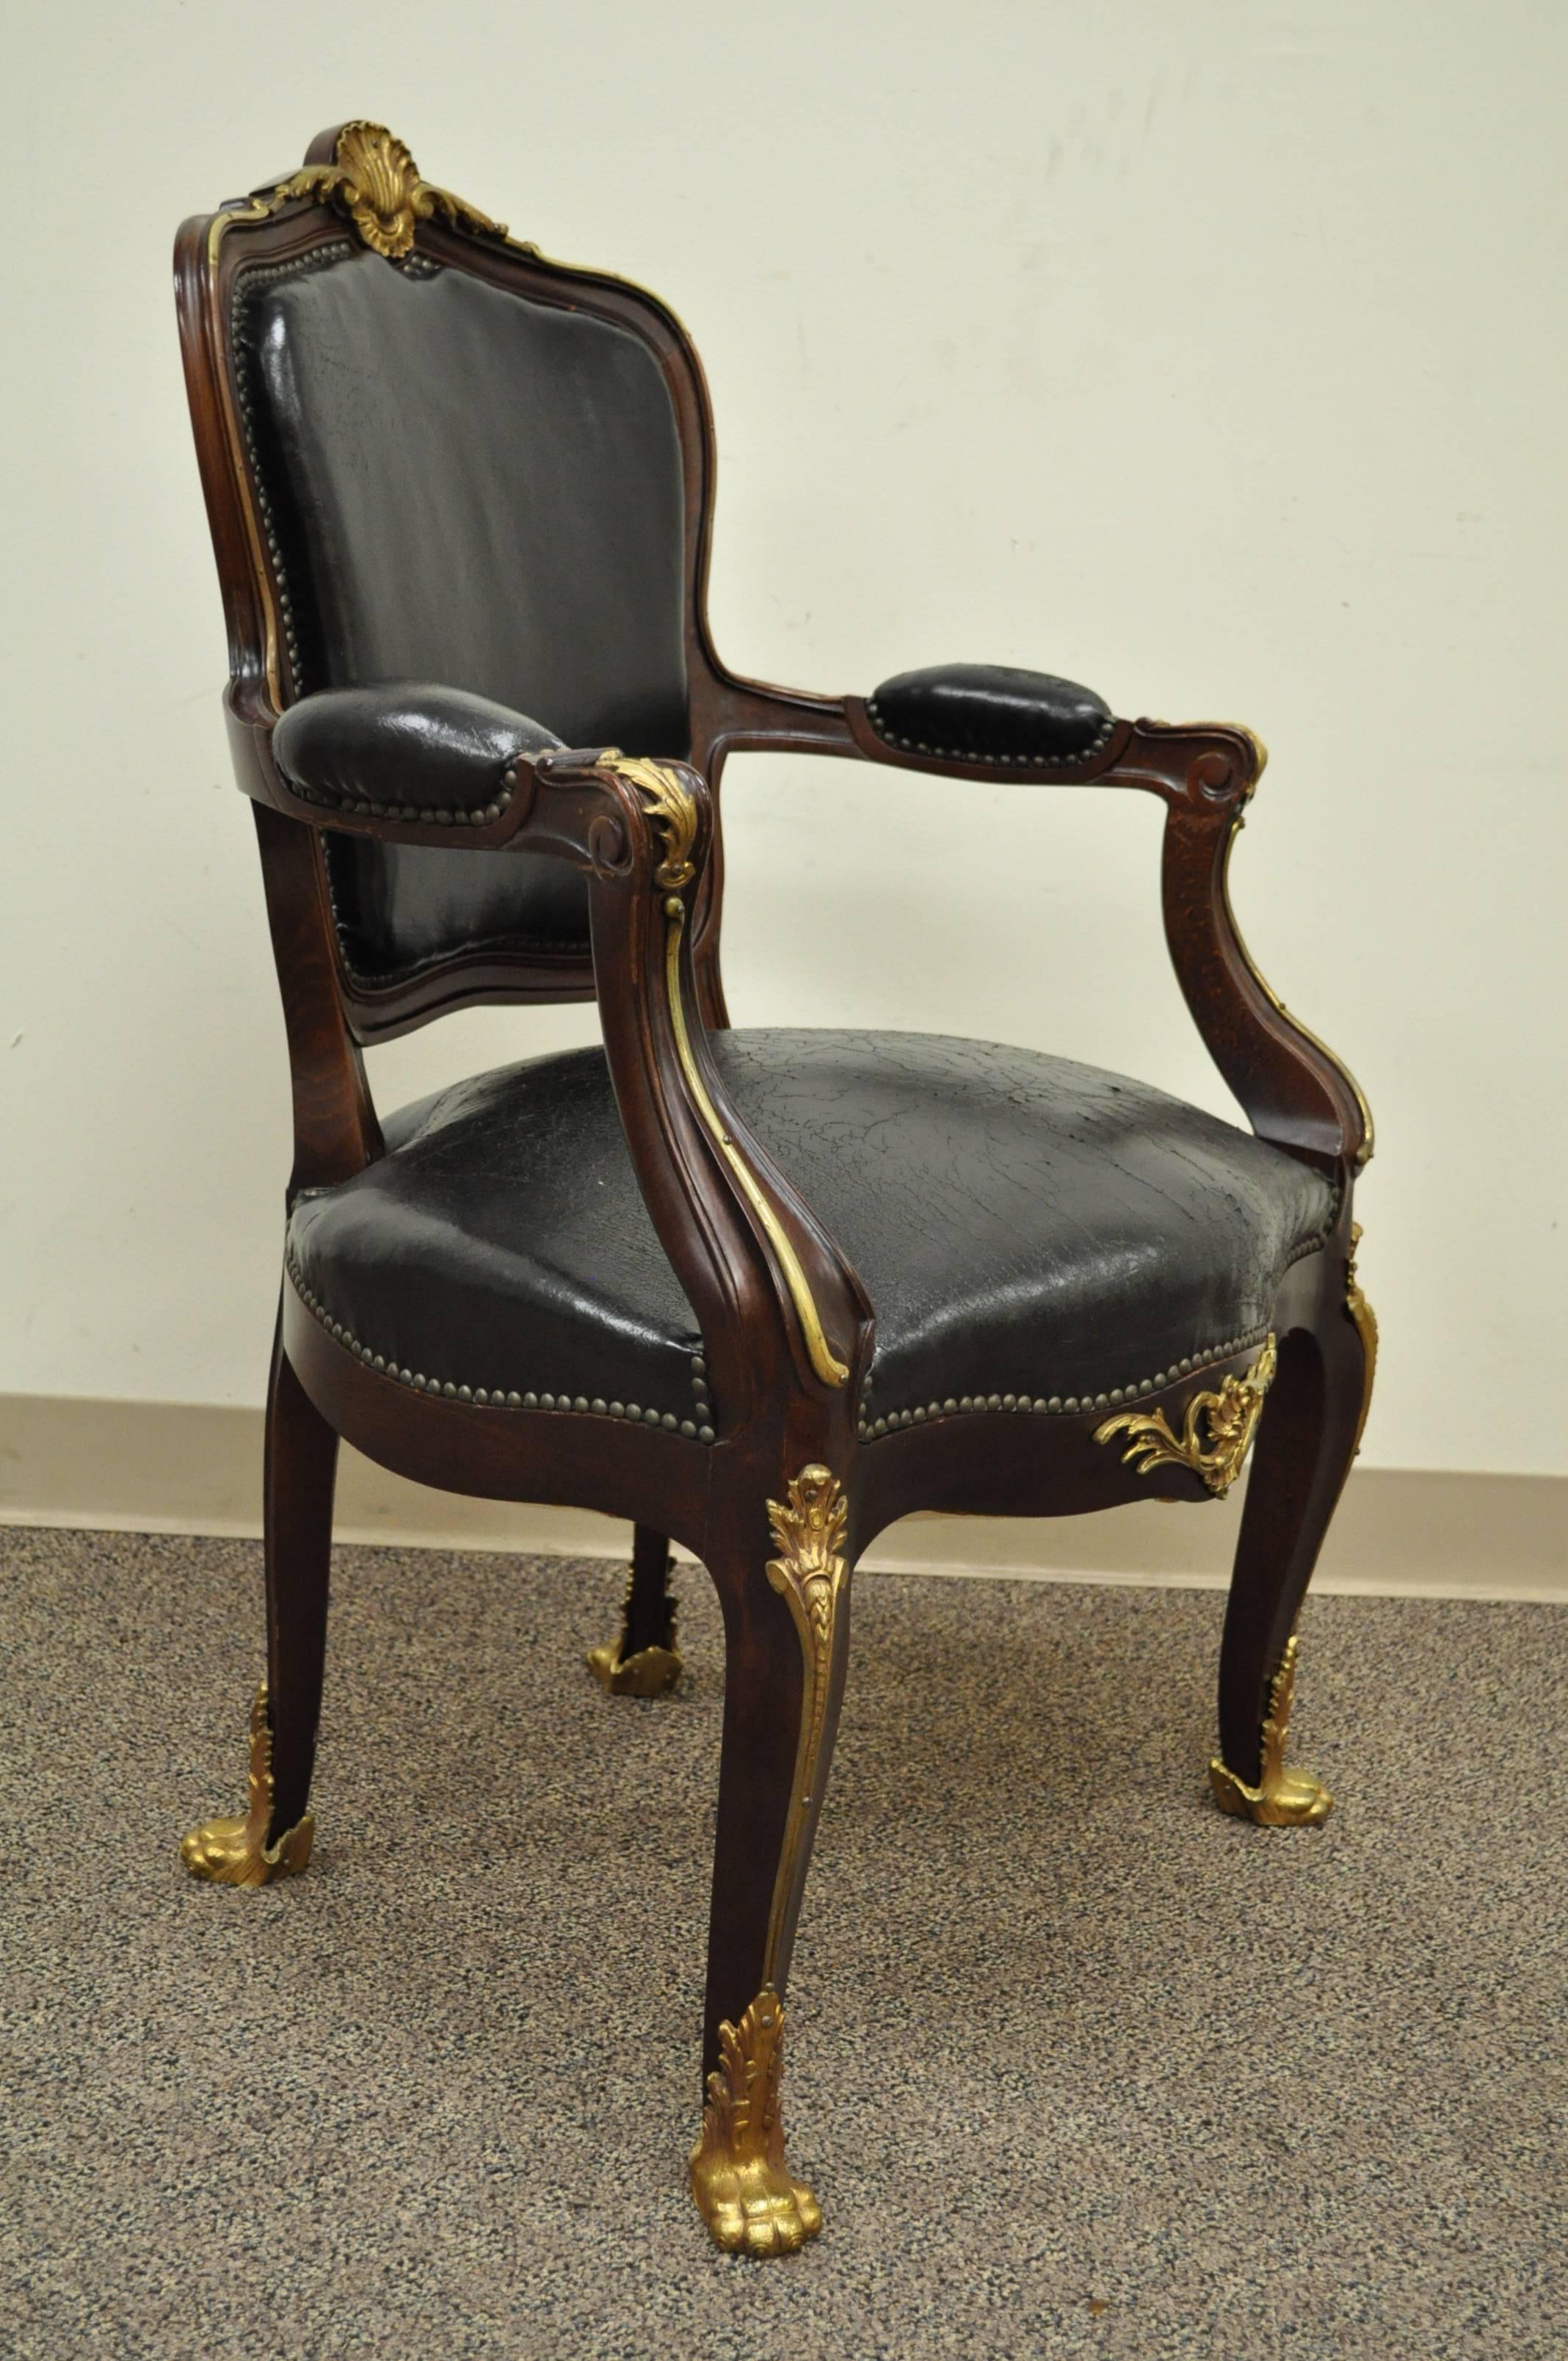 The finest Spanish made solid dark walnut armchair in the French Louis XV taste. Chair is nicely carved with a shapely form and delicate lines, and is further accented with cast bronze paw feet on the front and rear, central shell ornament, acanthus